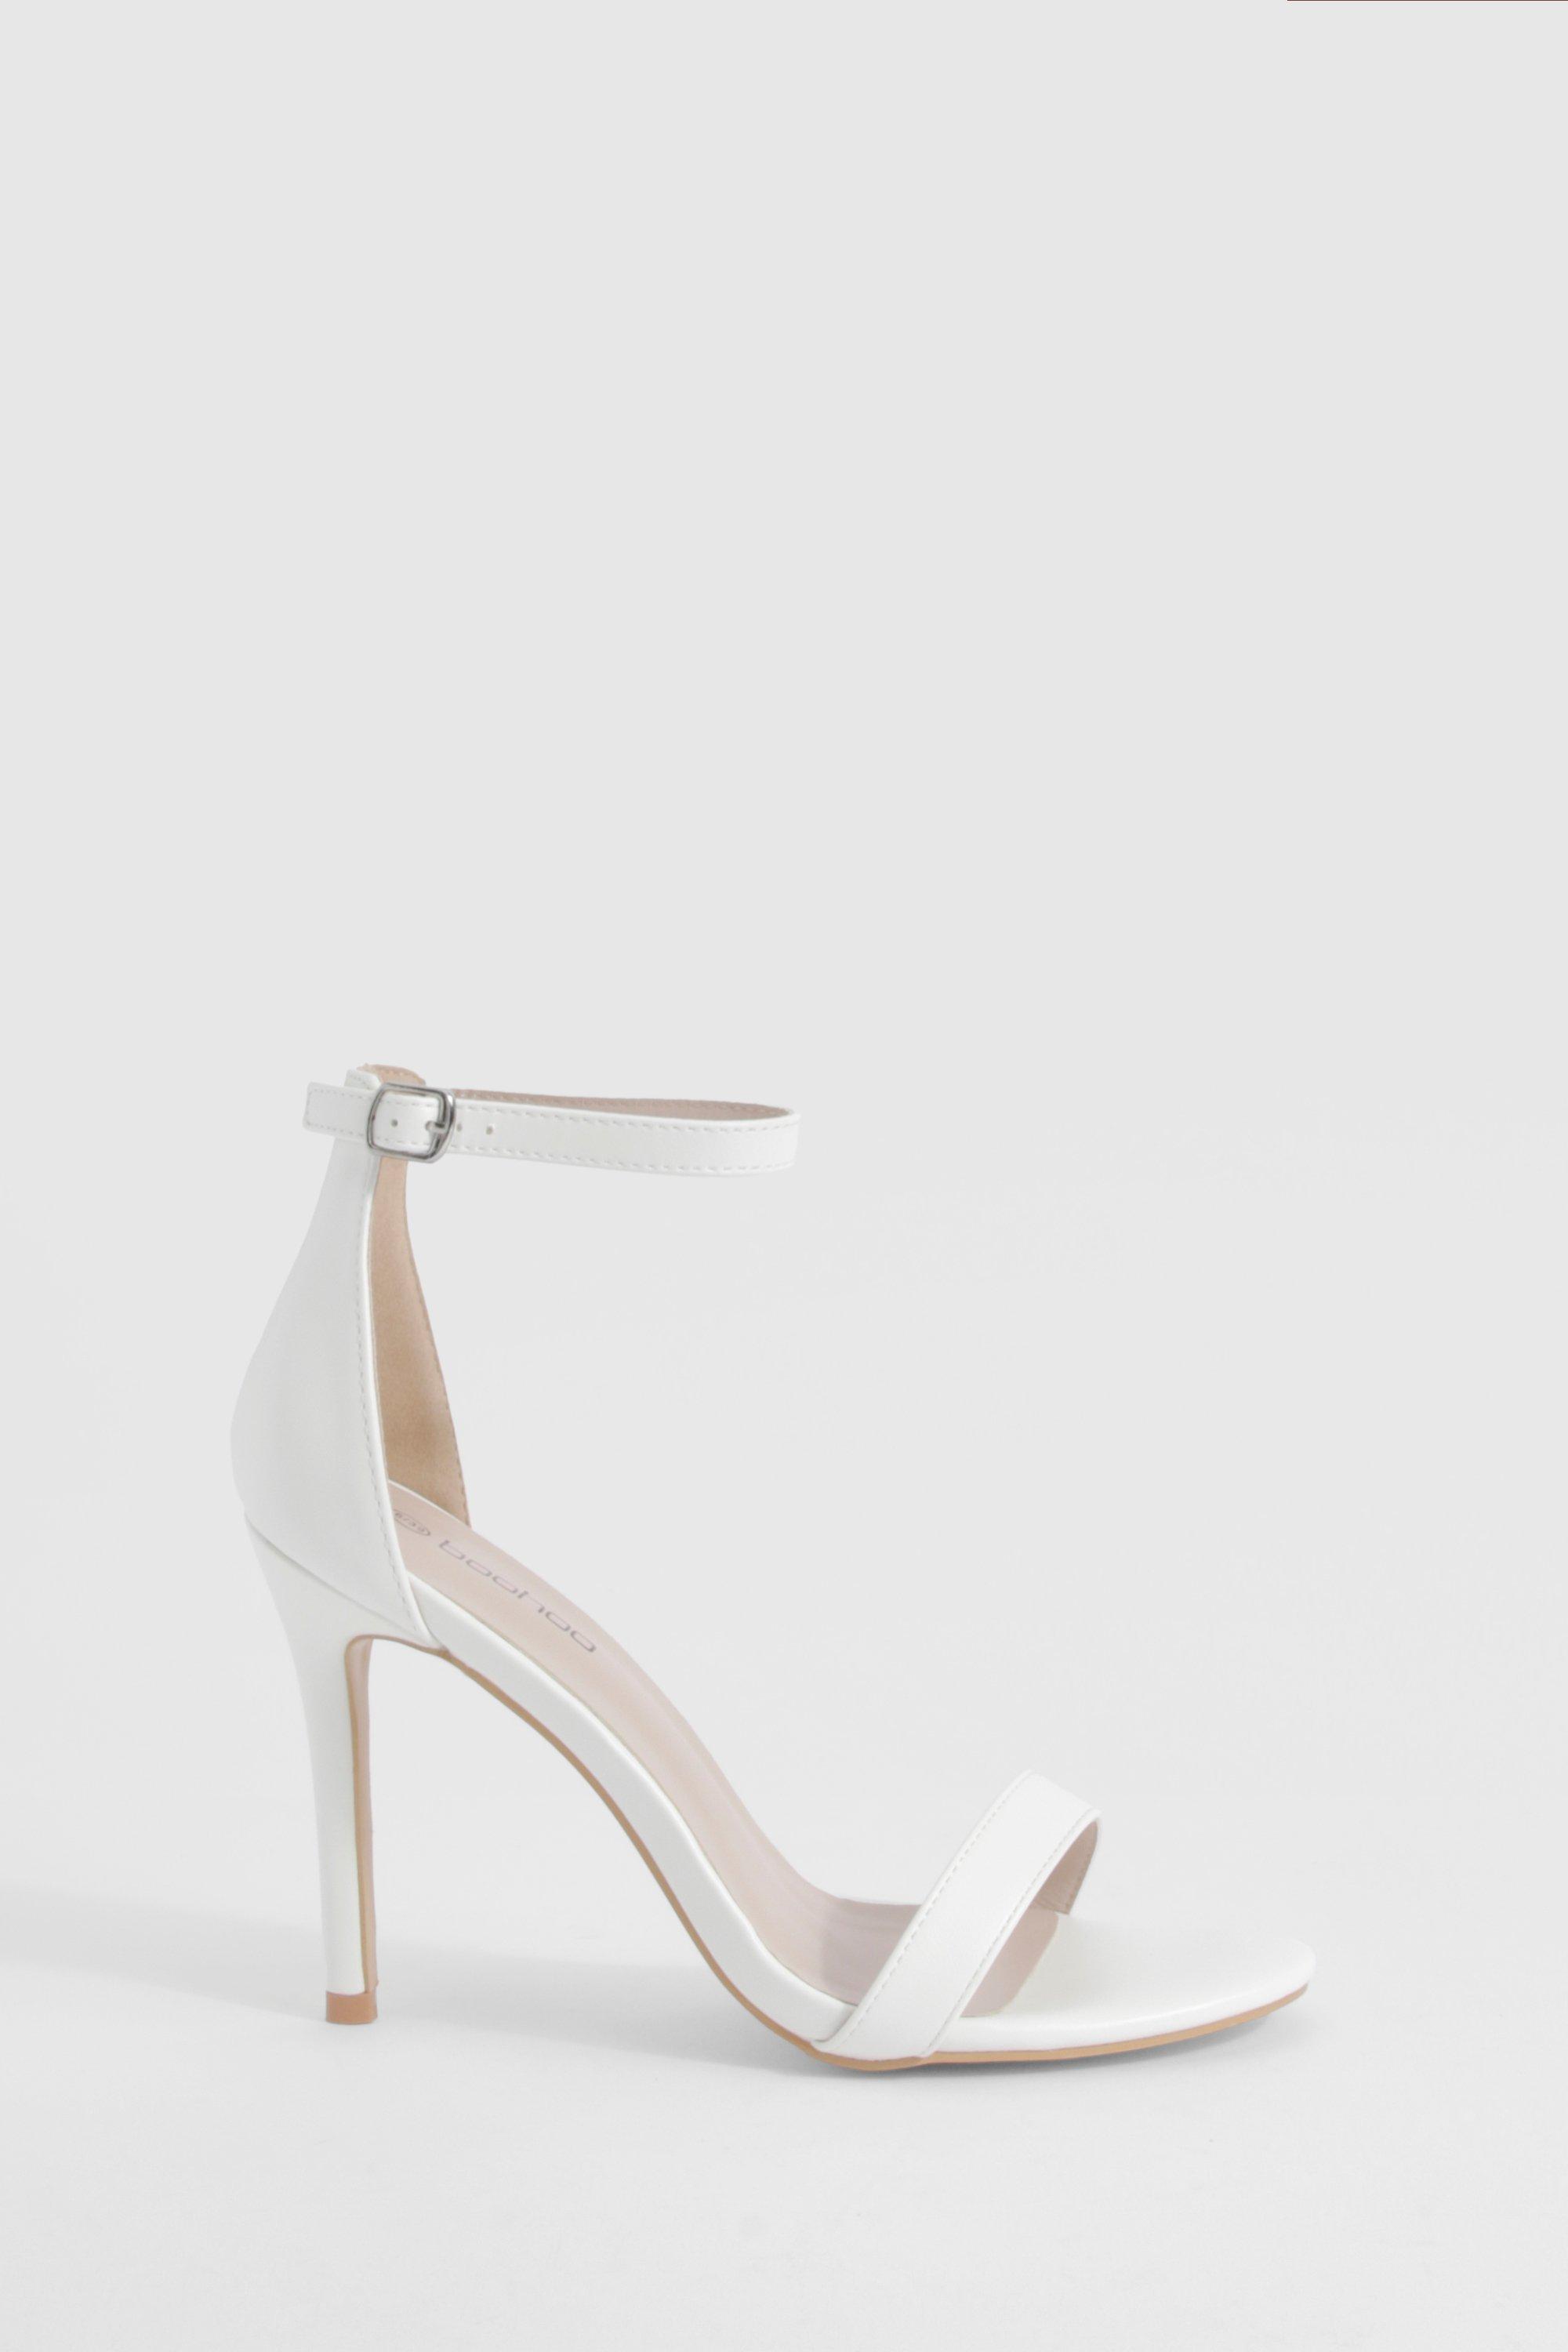 Barely There Basic Heels